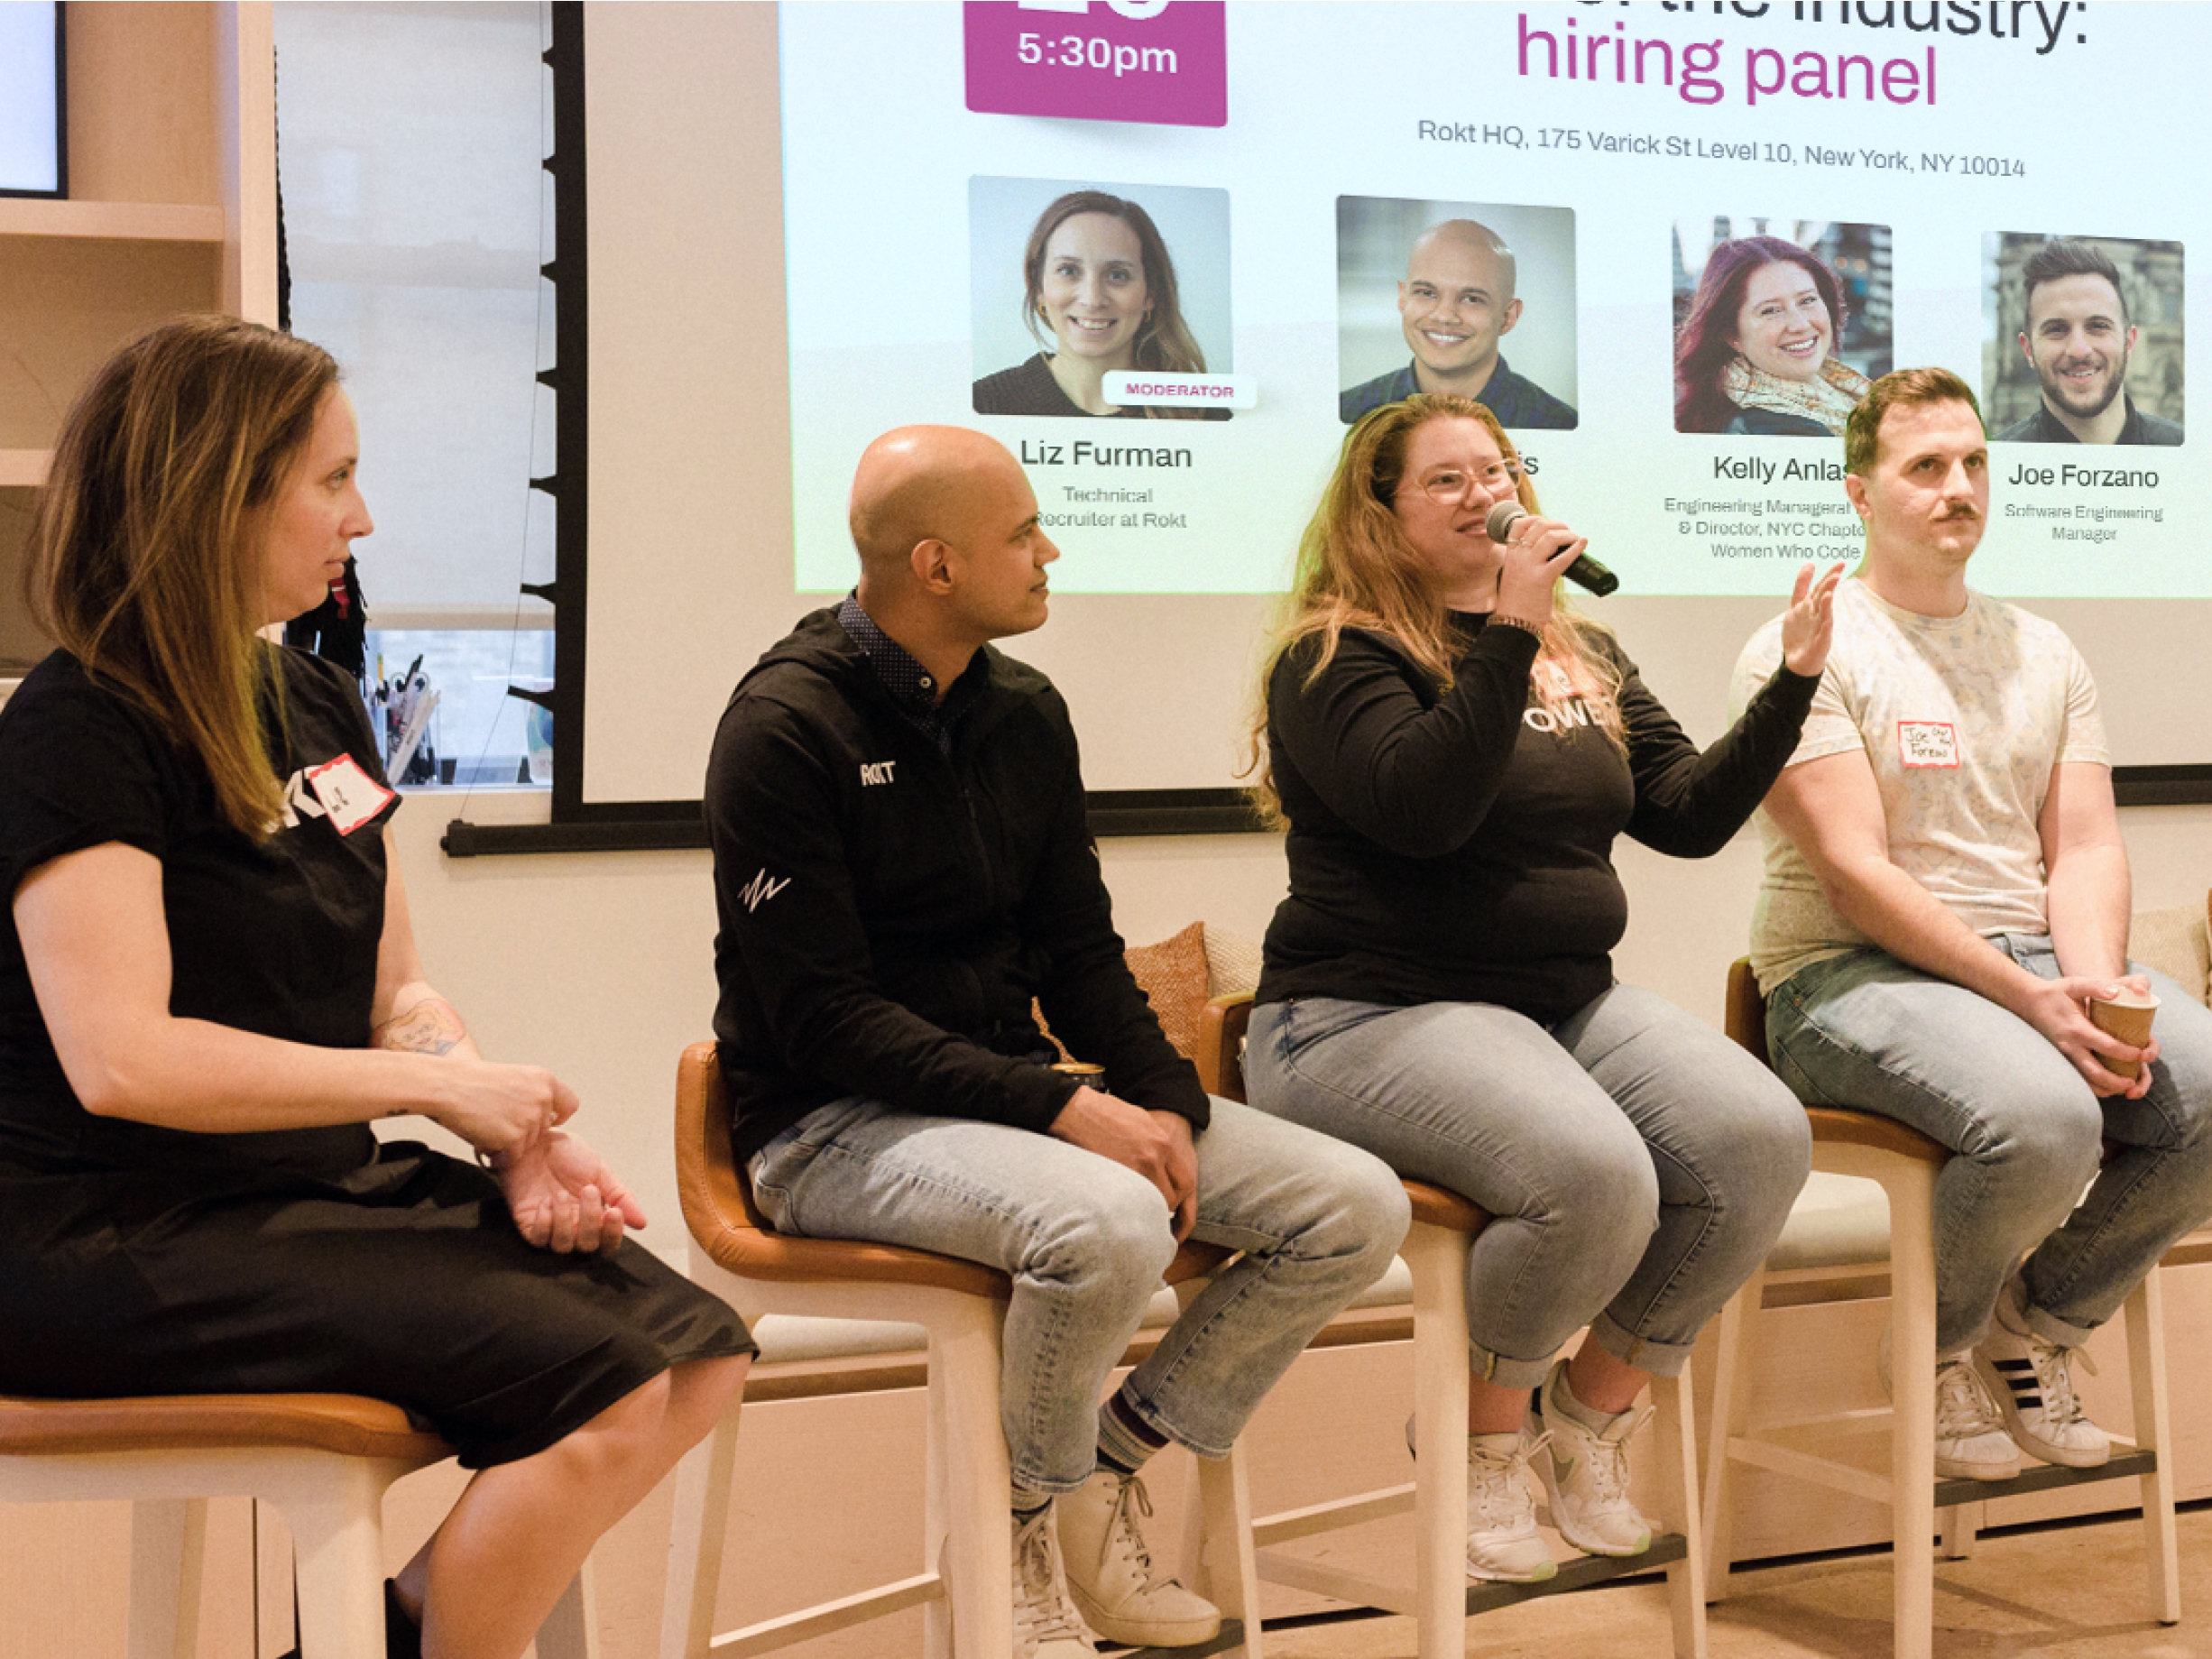 Women Who Code x Rokt: State of the industry hiring panel